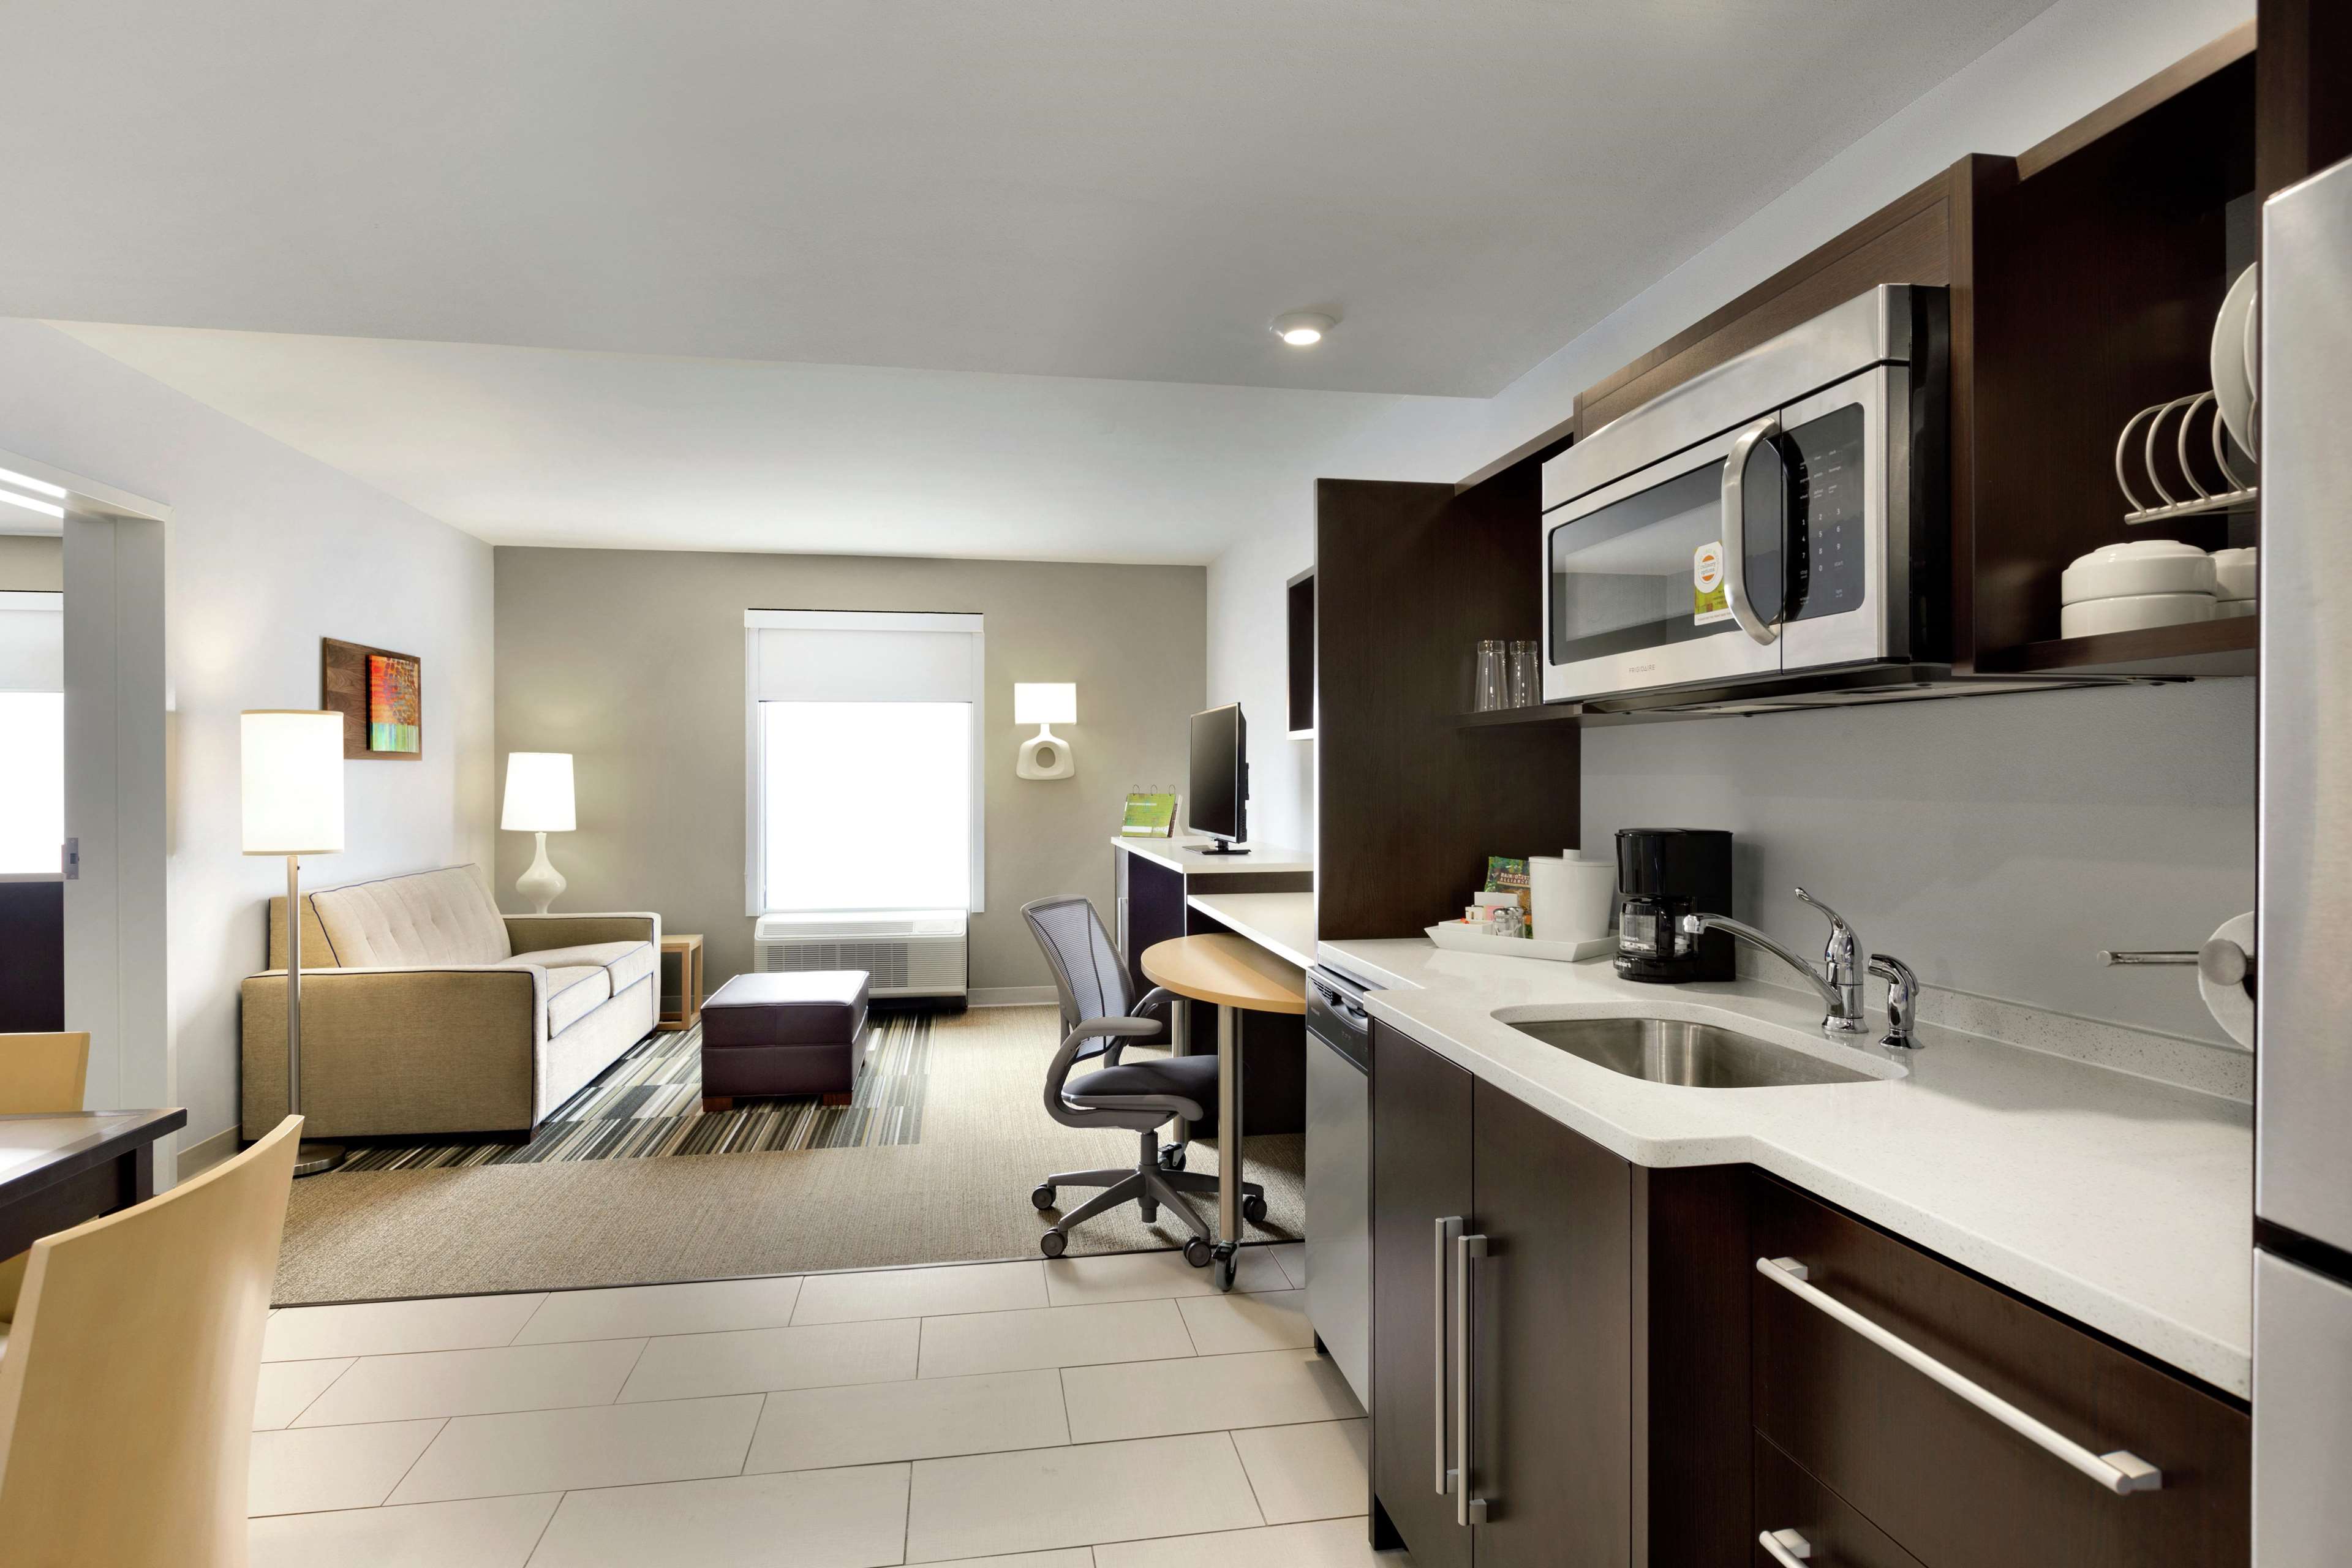 Home2 Suites by Hilton Macon I-75 North Photo